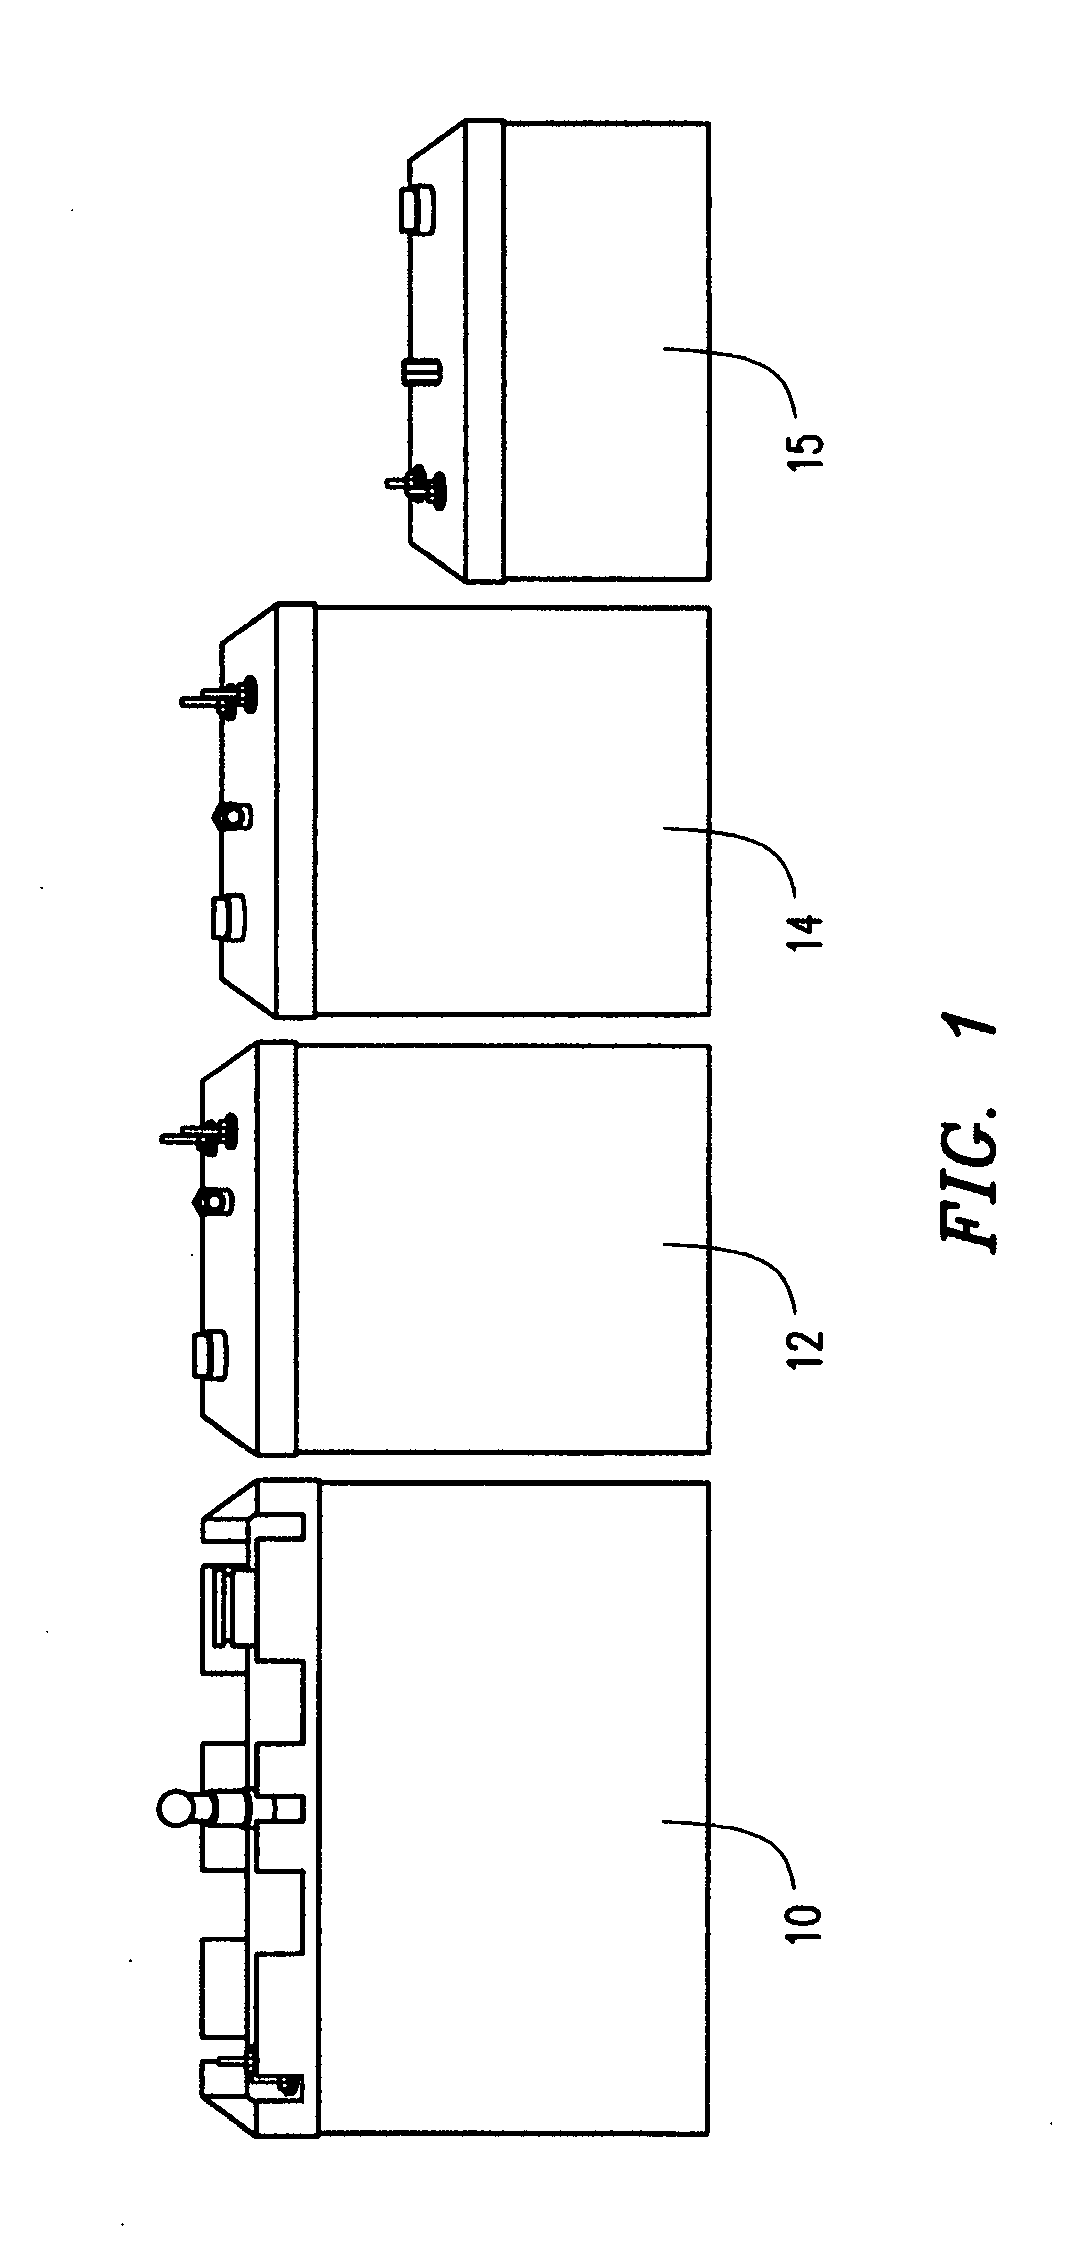 Method of and apparatus for hydrogen enhanced diesel engine performance